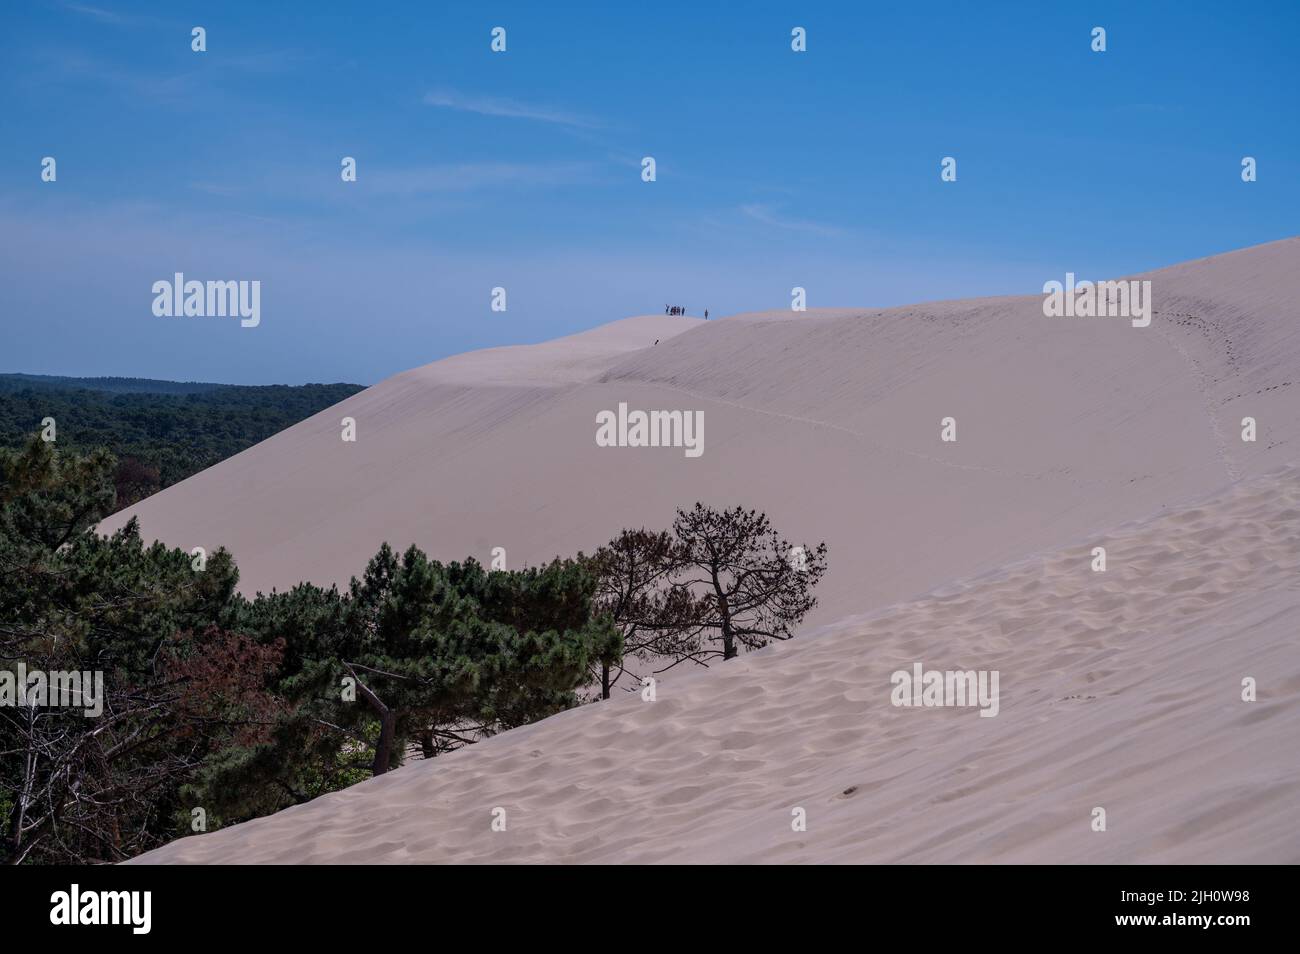 The Dune of Pilat also called Grande Dune du Pilat, the tallest sand dunes in Europe overlooking Arcachon Bay in France Stock Photo